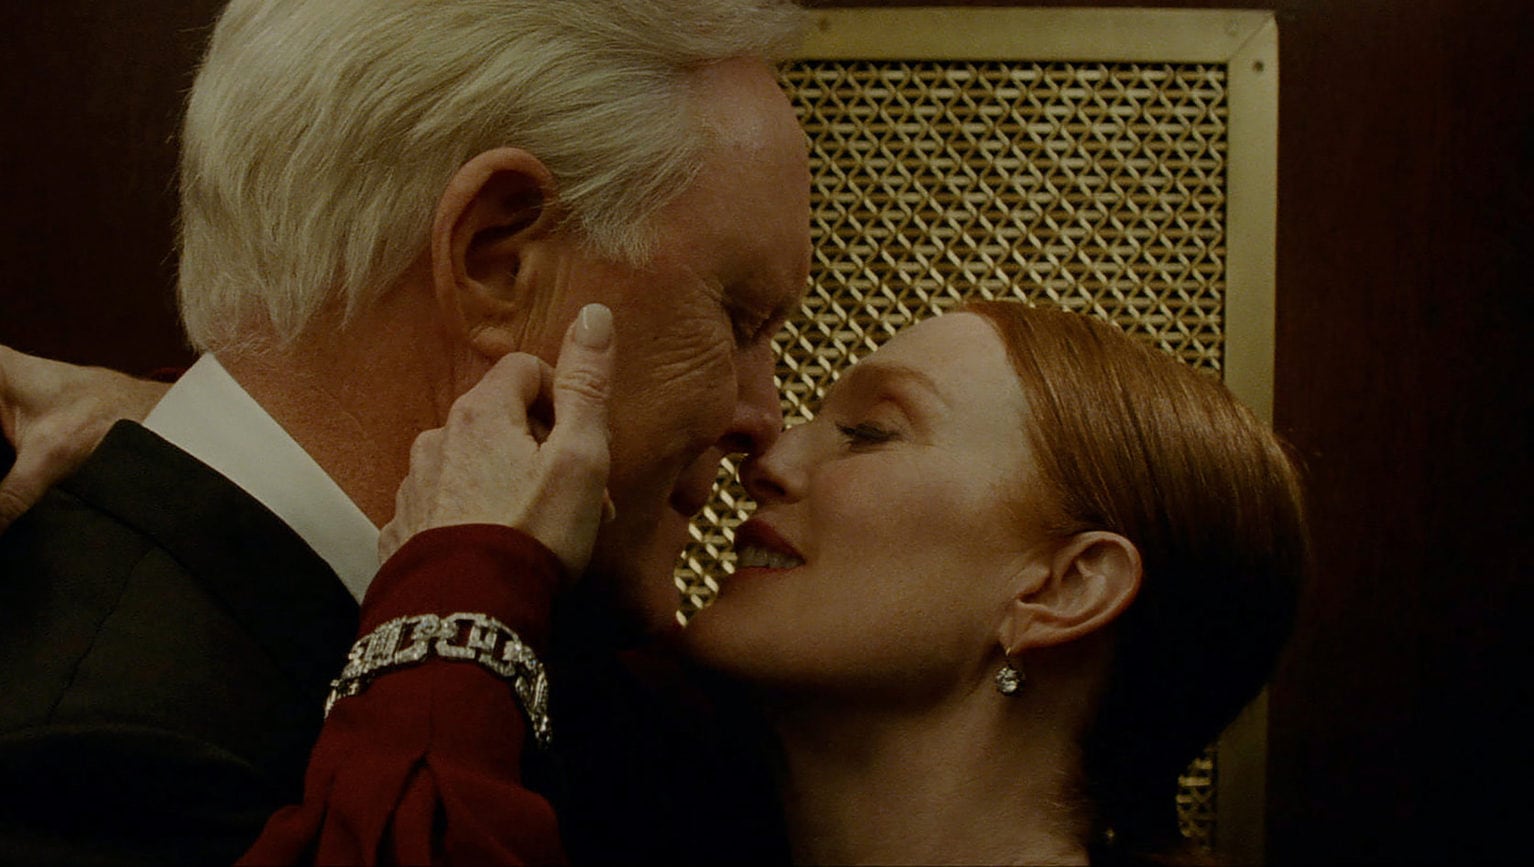 Veteran actors John Lithgow and Julianne Moore star in the new film.